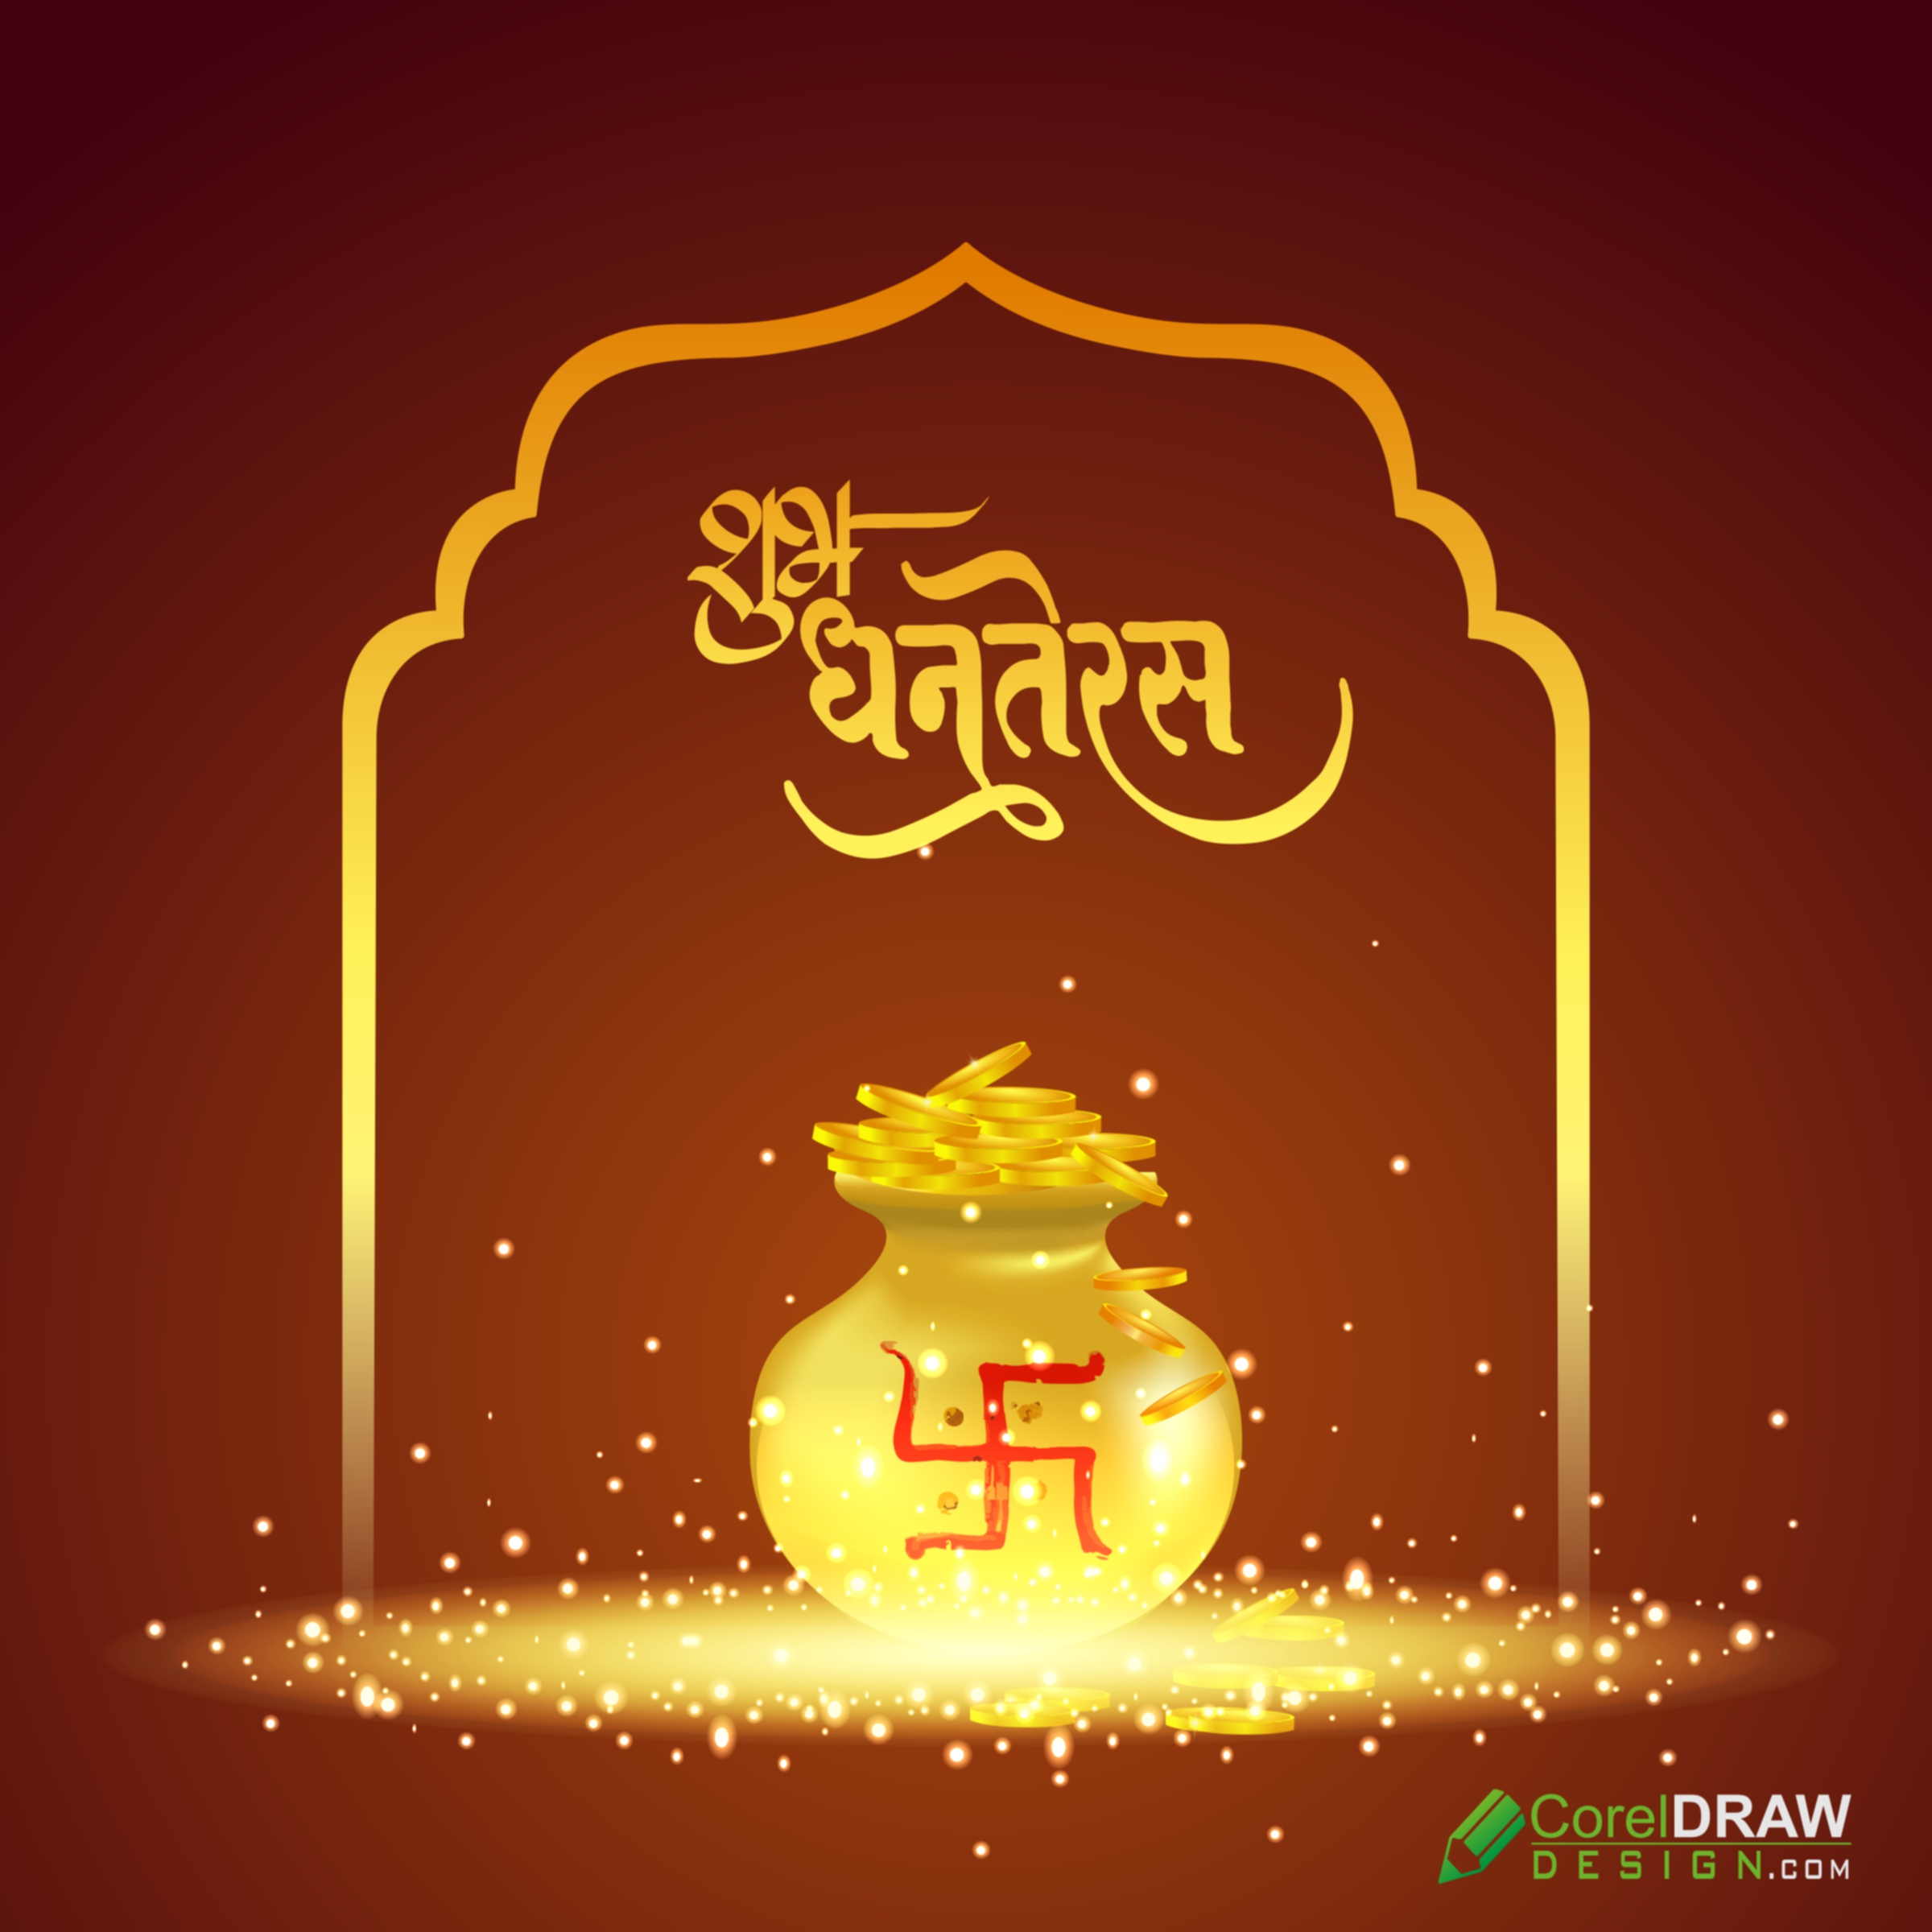 Download Shubh Dhanteras Background banner design with illustration of  golden pot (kalash) and coin, Free Diwali and Dhanteras CDR templates on  coreldrawdesign | CorelDraw Design (Download Free CDR, Vector, Stock  Images, Tutorials,